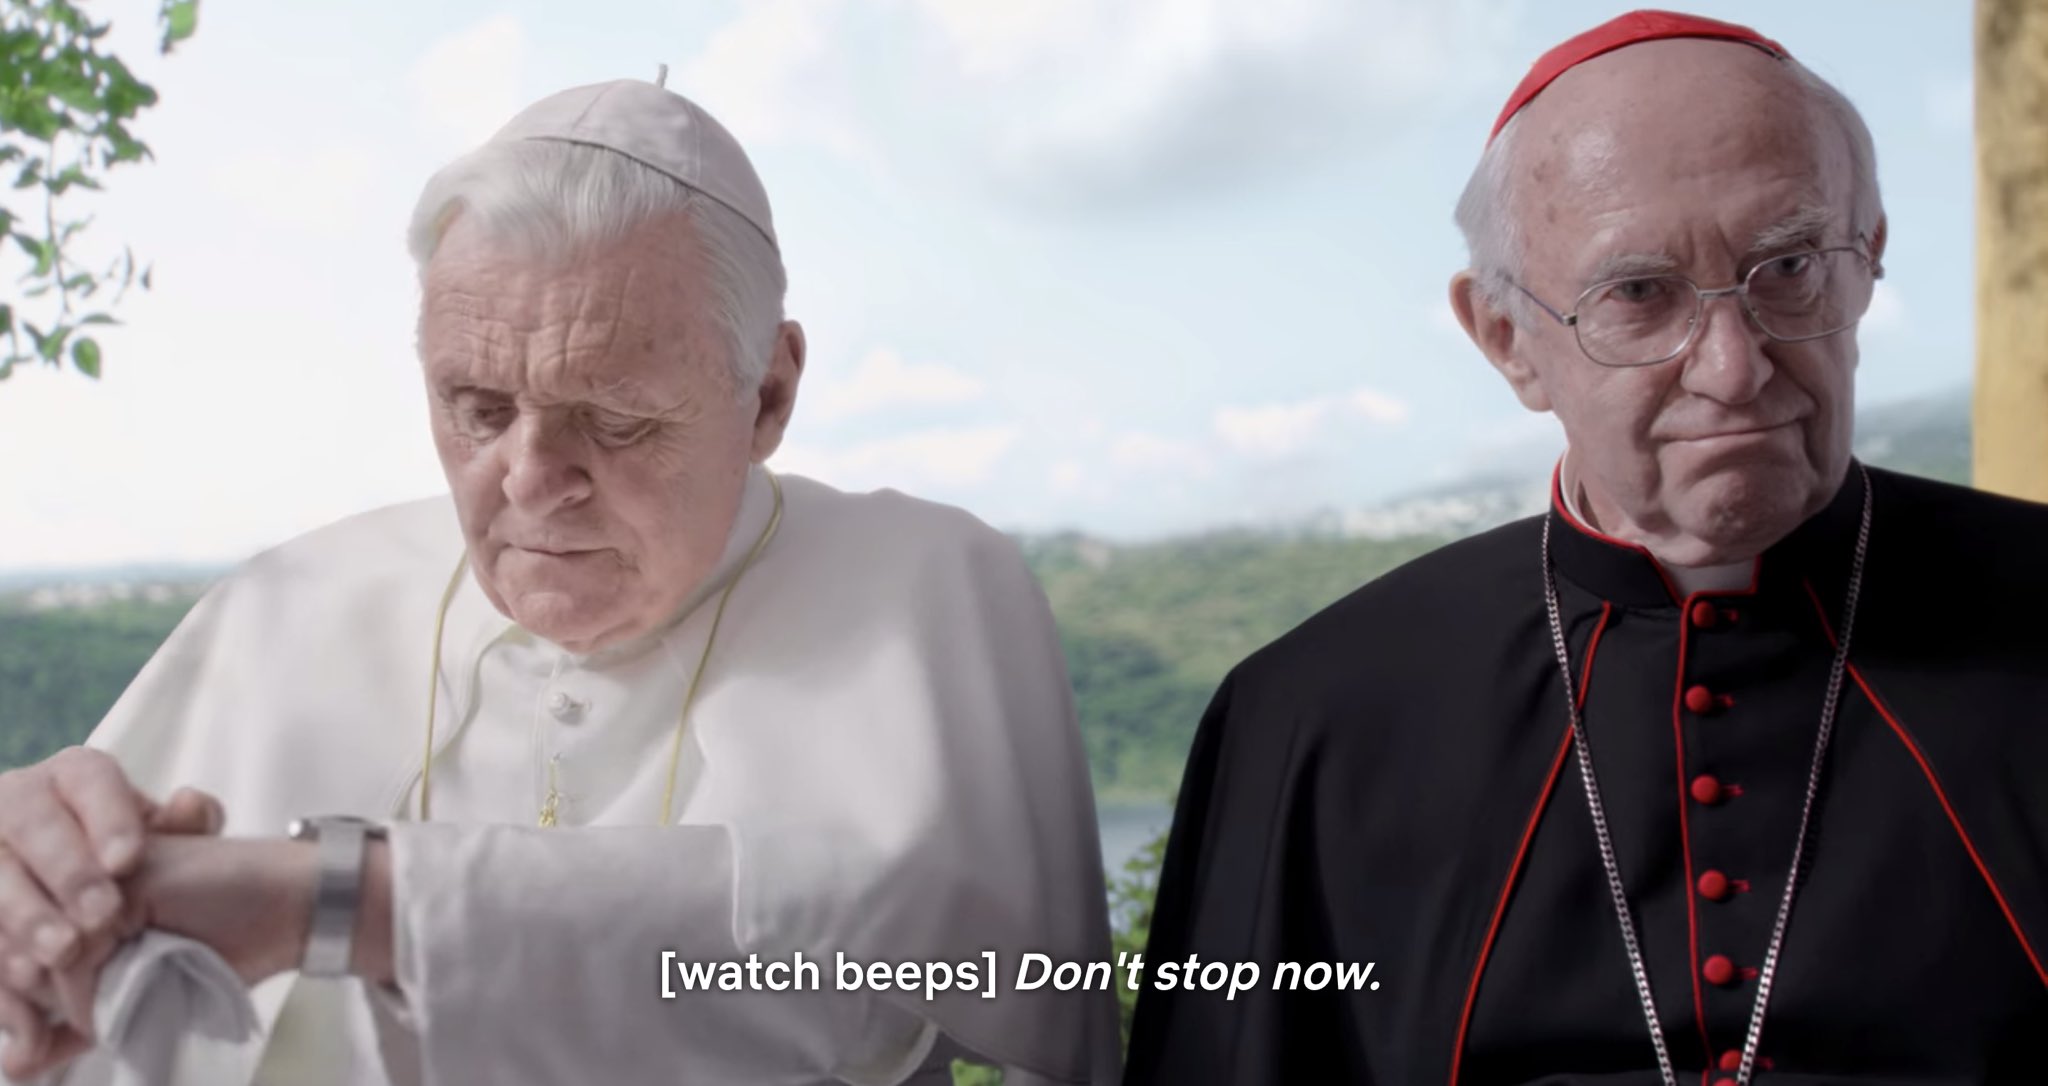 NetflixFilm on Twitter: "tfw Anthony Hopkins' Pope Benedict has been more  physically active than you have all weekend https://t.co/WcukI9lZkL" /  Twitter